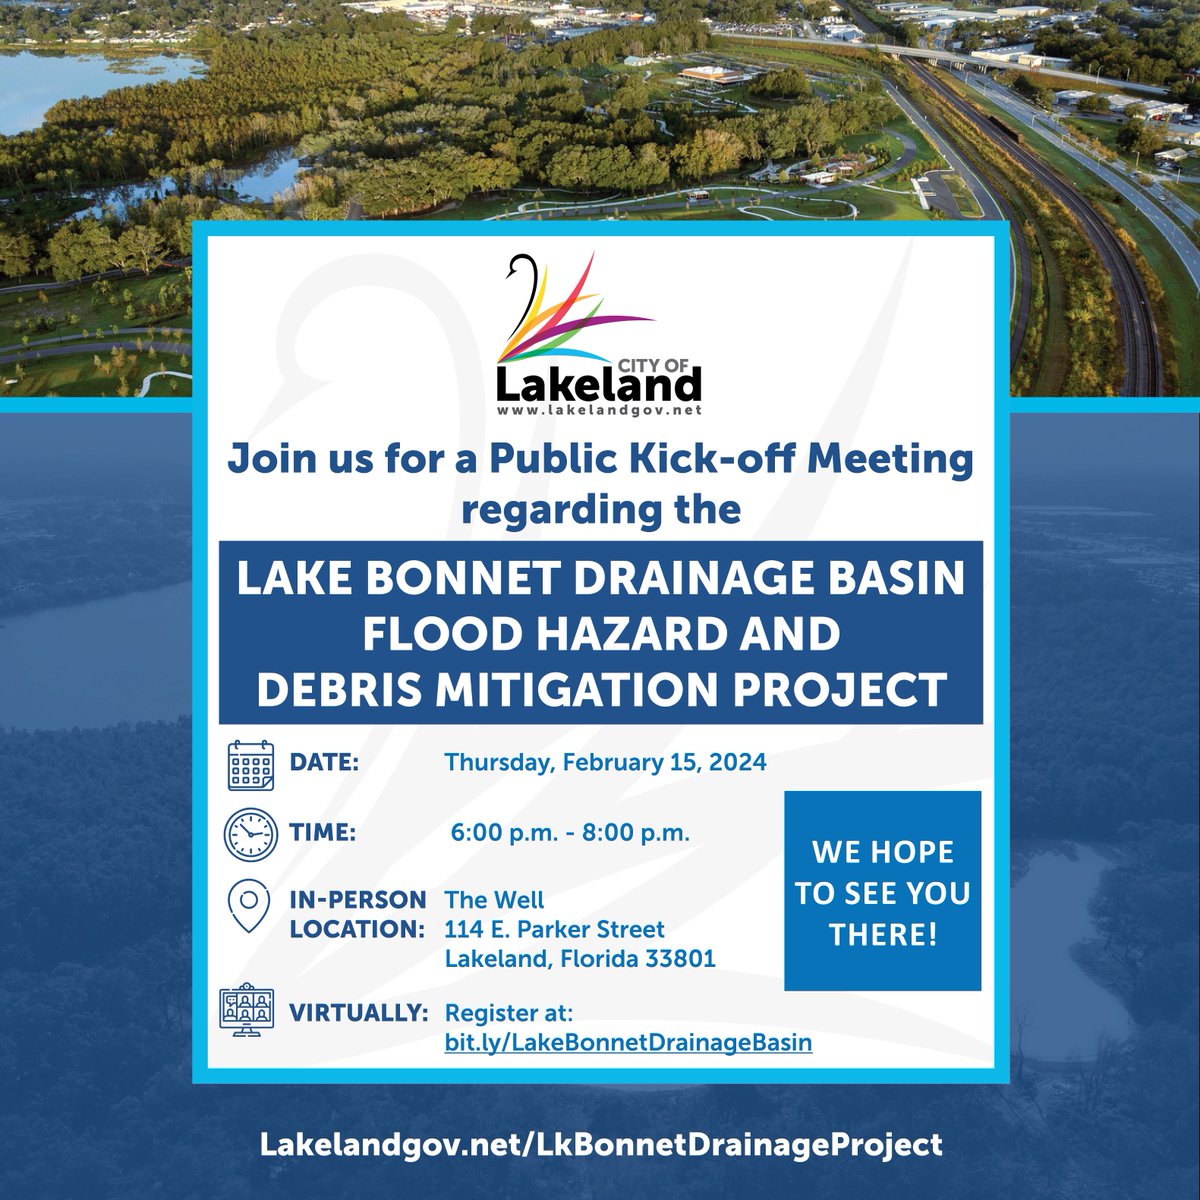 You're invited! Join us this evening (2/15) from 6-8 p.m. at The Well, 114 E. Parker Street in Lakeland or virtually online, for the Lake Bonnet Drainage Basin Flood Hazard and Debris Mitigation Project Public Kick-off Meeting. To learn more, visit Lakelandgov.net/LkBonnetDraina….